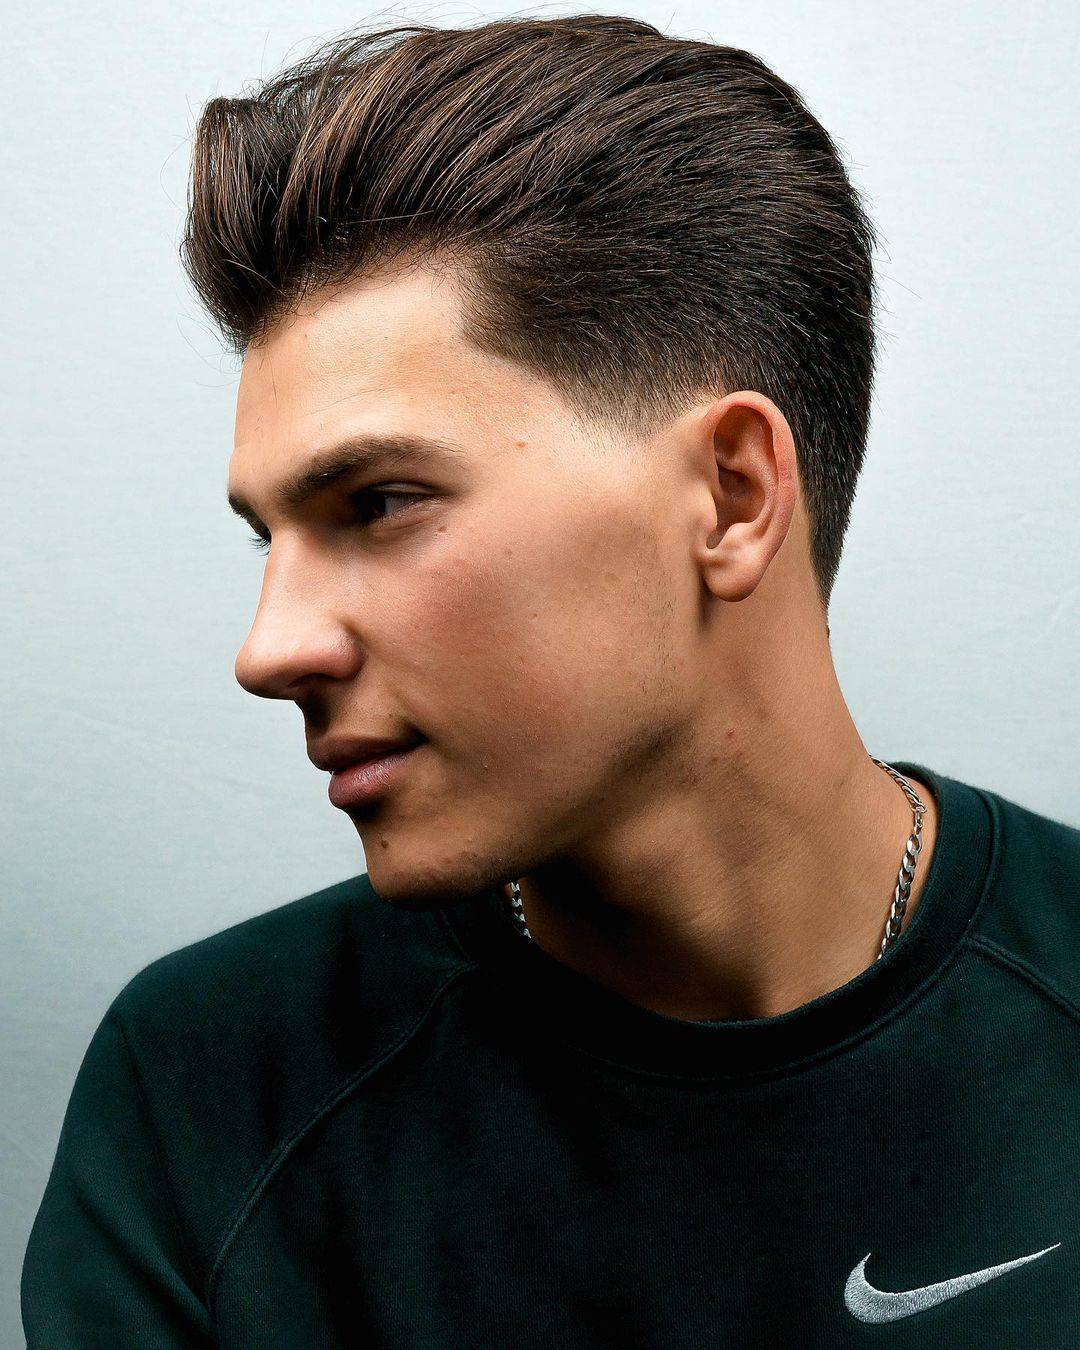 Hairstyle for Men 249 best haircut for men | haircut for men | haircuts for men Haircut for Men